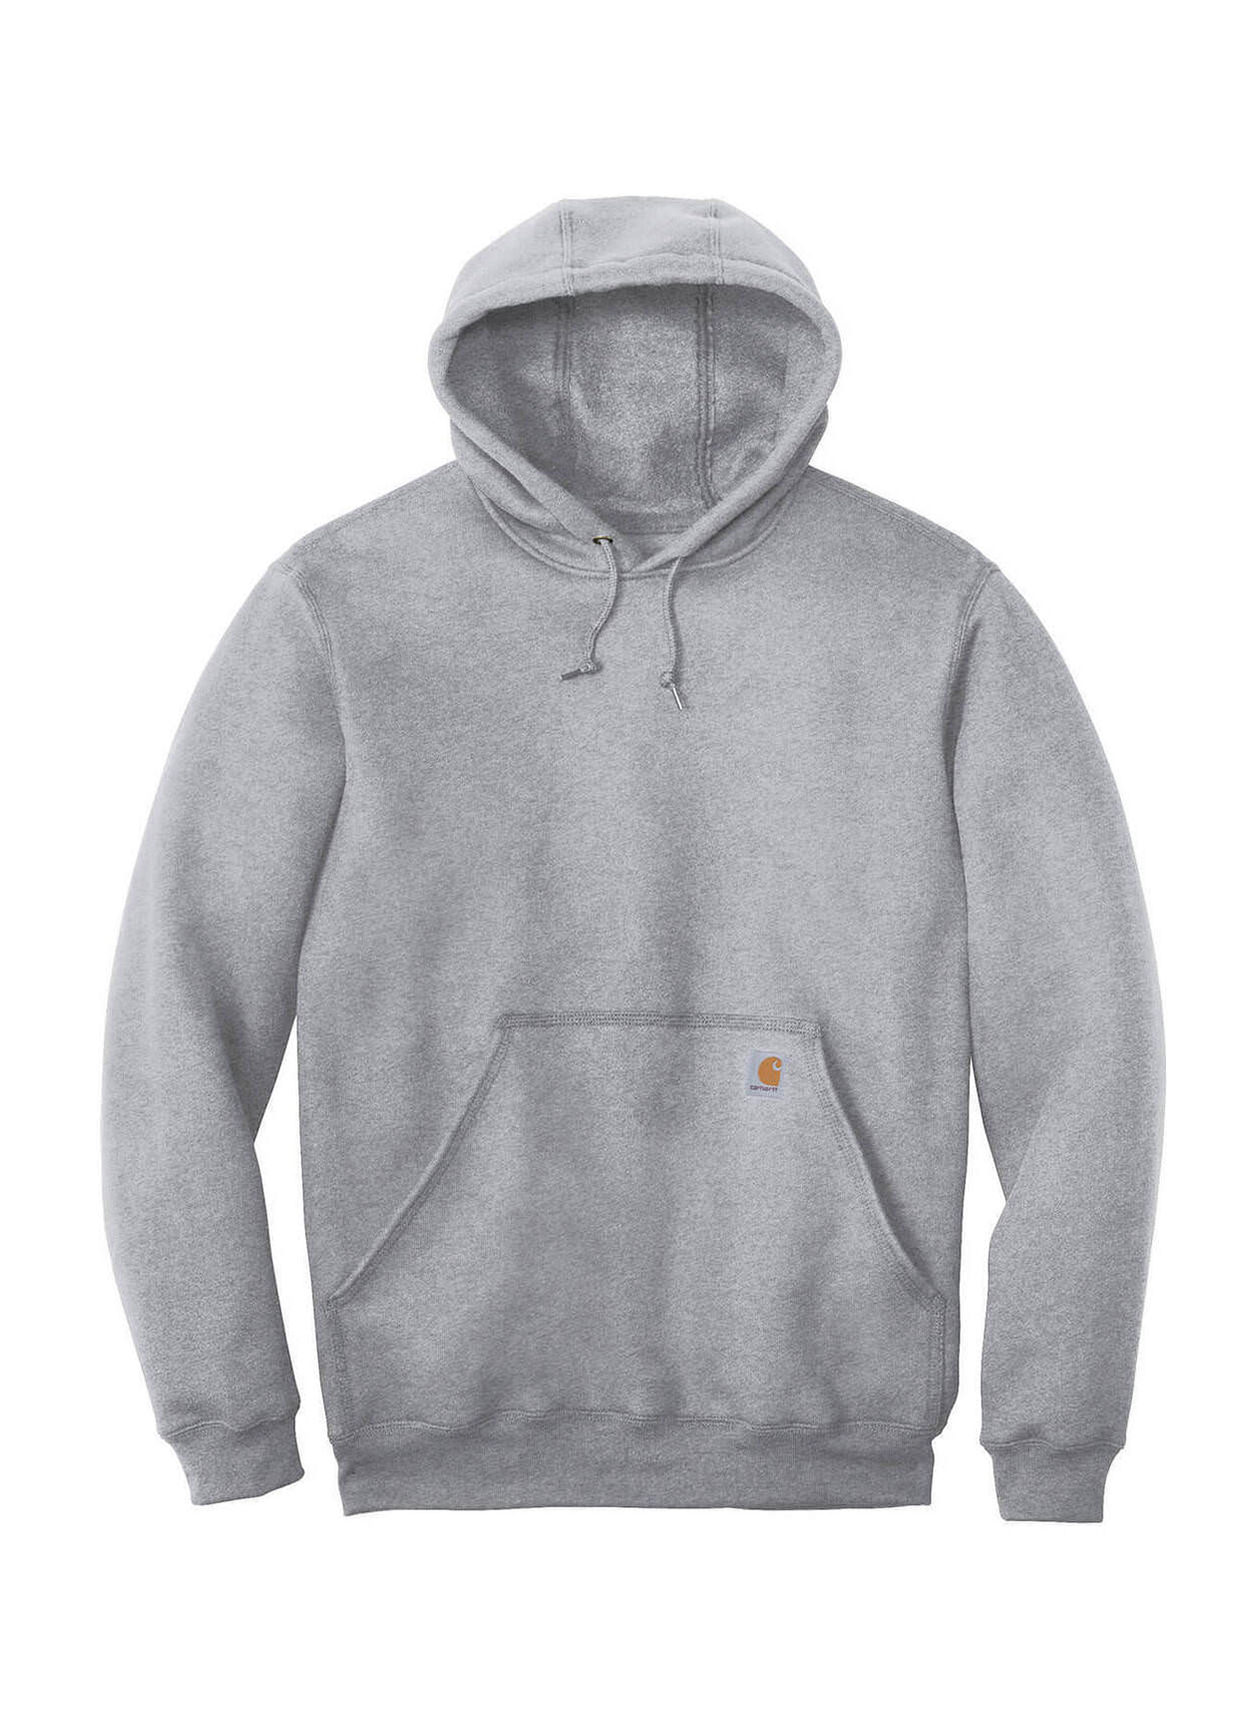 Custom Embroidered Carhartt Men's Heather Grey Midweight Hooded ...